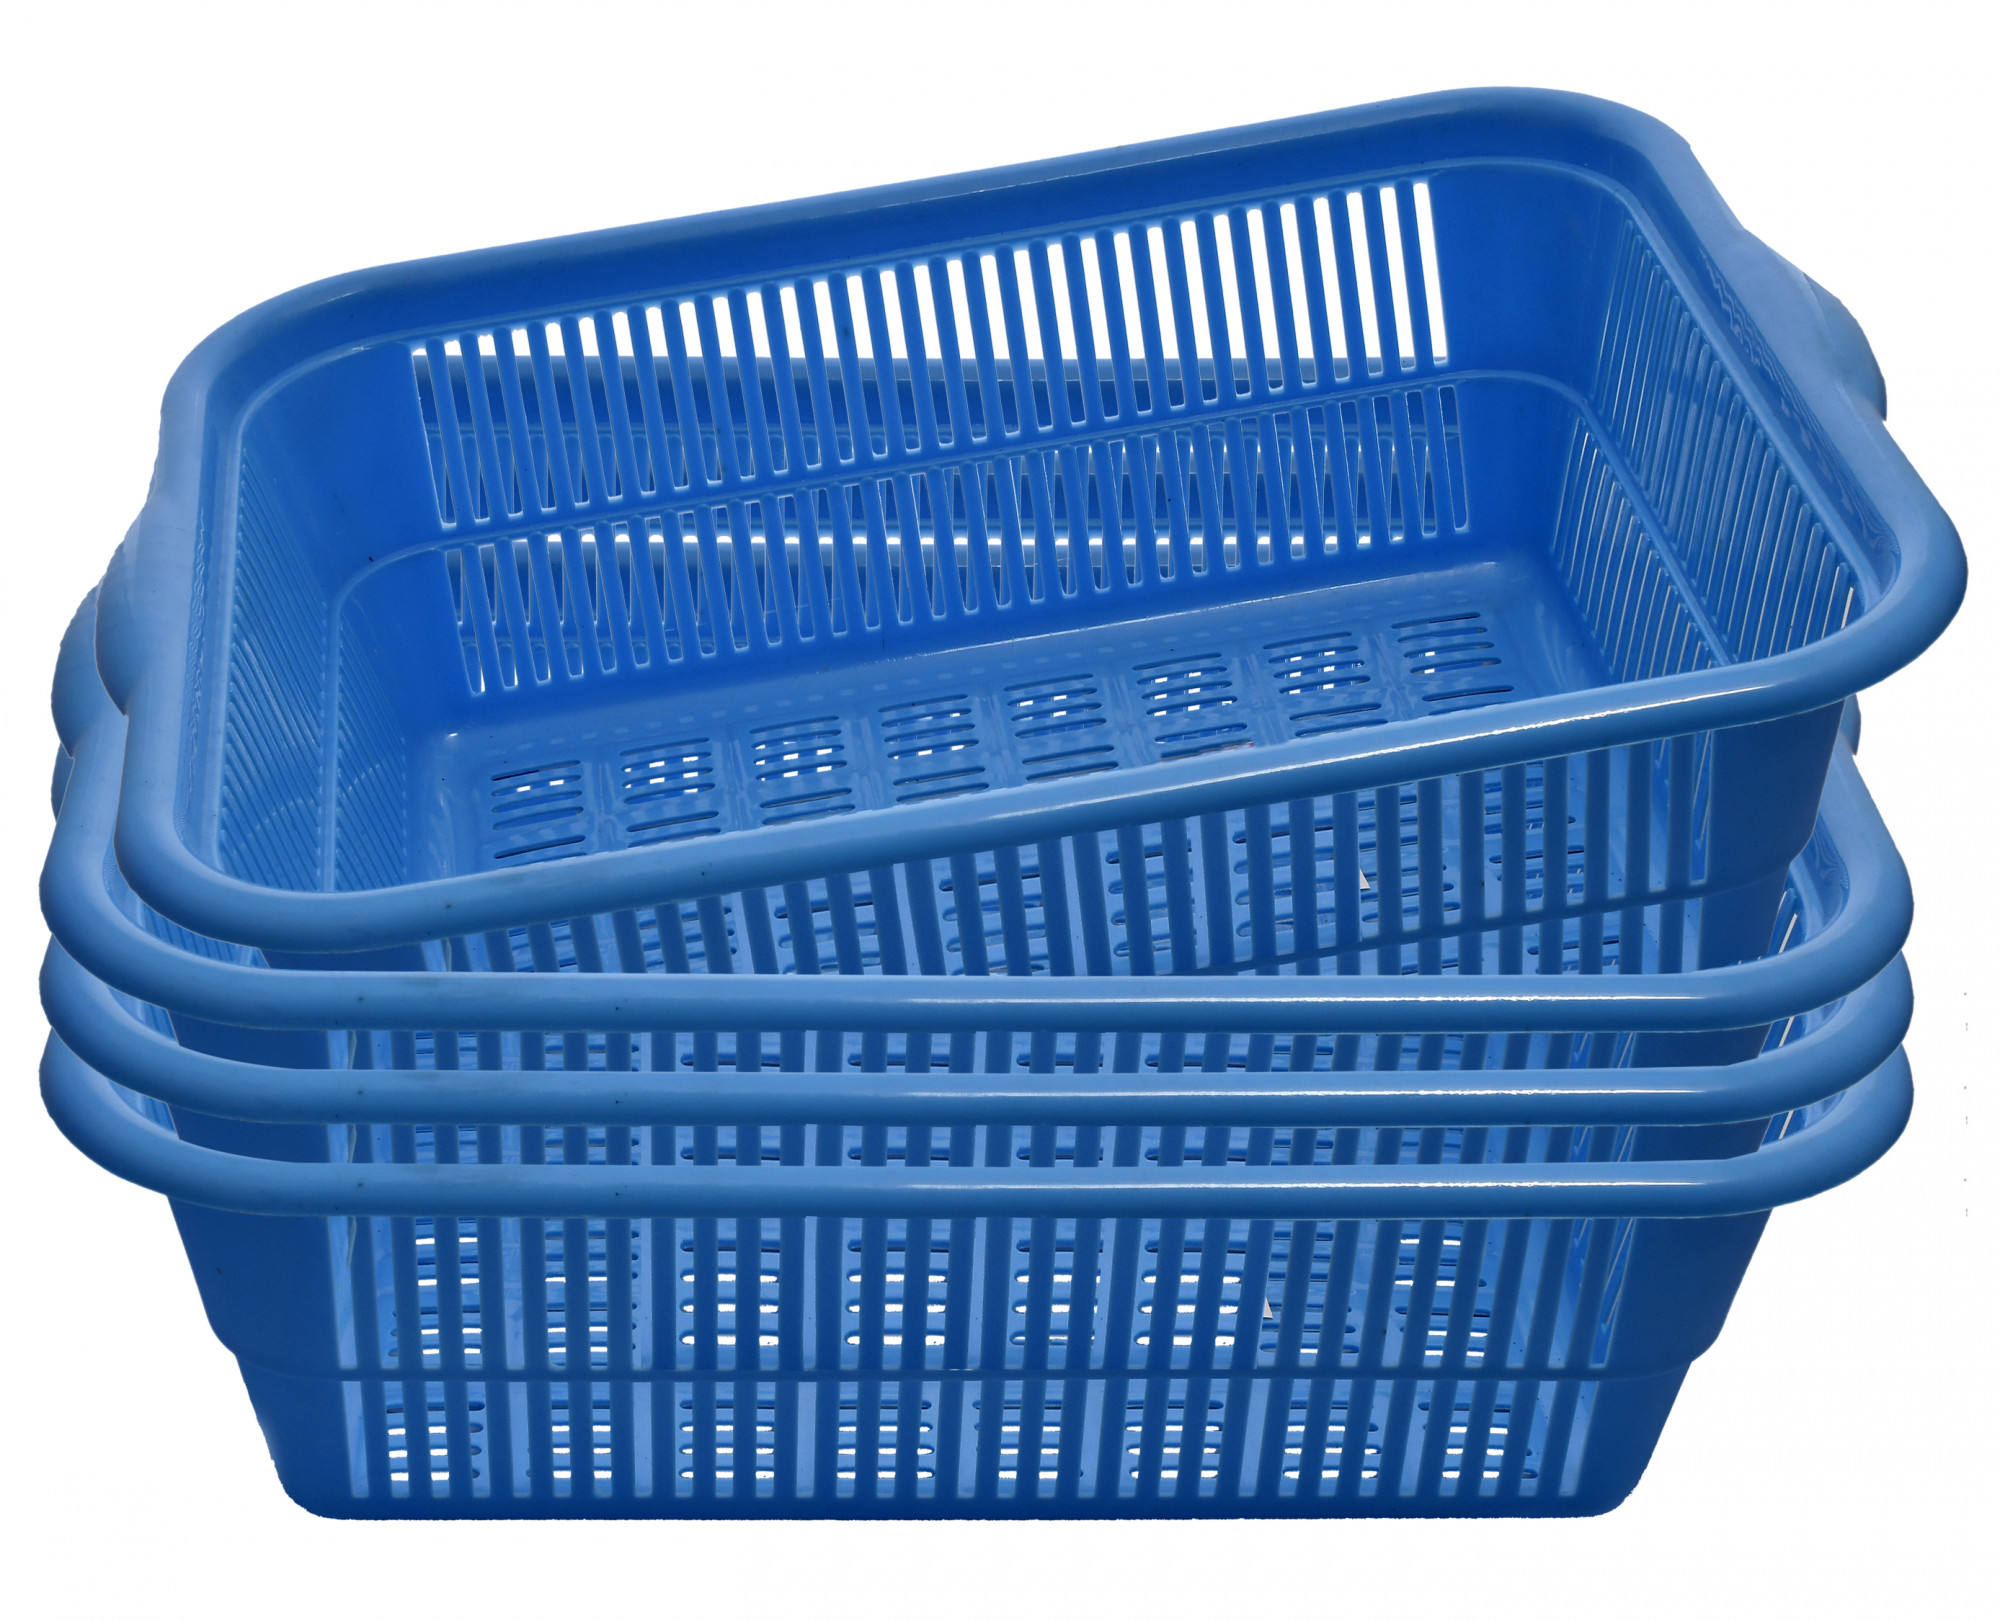 Kuber Industries 4 Pieces Plastic Kitchen Dish Rack Drainer Vegetables And Fruits Basket Dish Rack Multipurpose Organizers ,Small Size,Blue